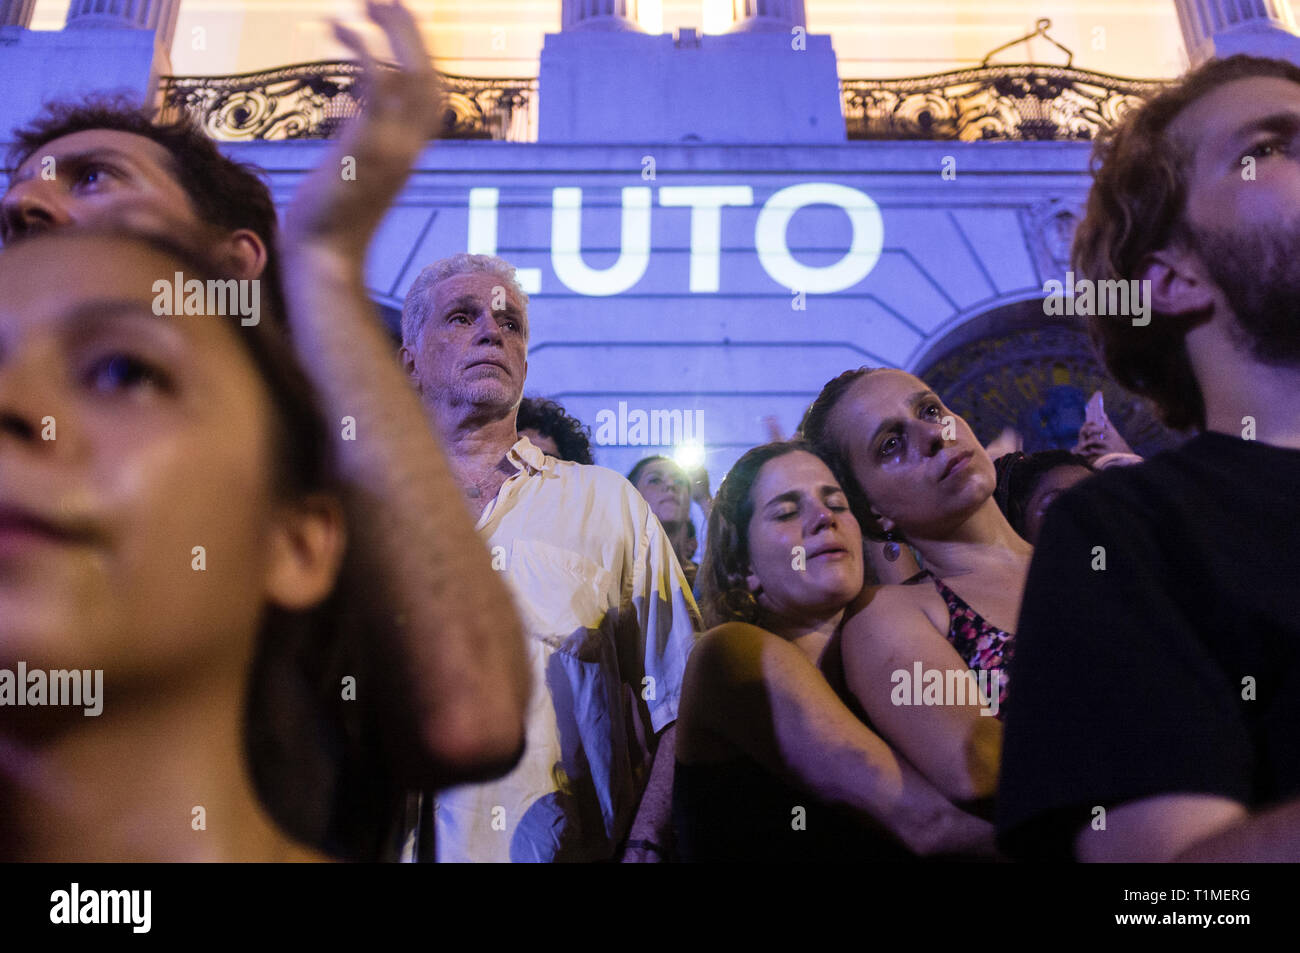 Demonstration for Marielle Franco, Brazilian feminist, politician and human rights activist, murdered on 14 March 2018 in Rio de Janeiro -  she had been an outspoken critic of police brutality and extrajudicial killings. Protestors get emotional, 'luto' means mourning, downtown Rio de Janeiro, Brazil. Stock Photo